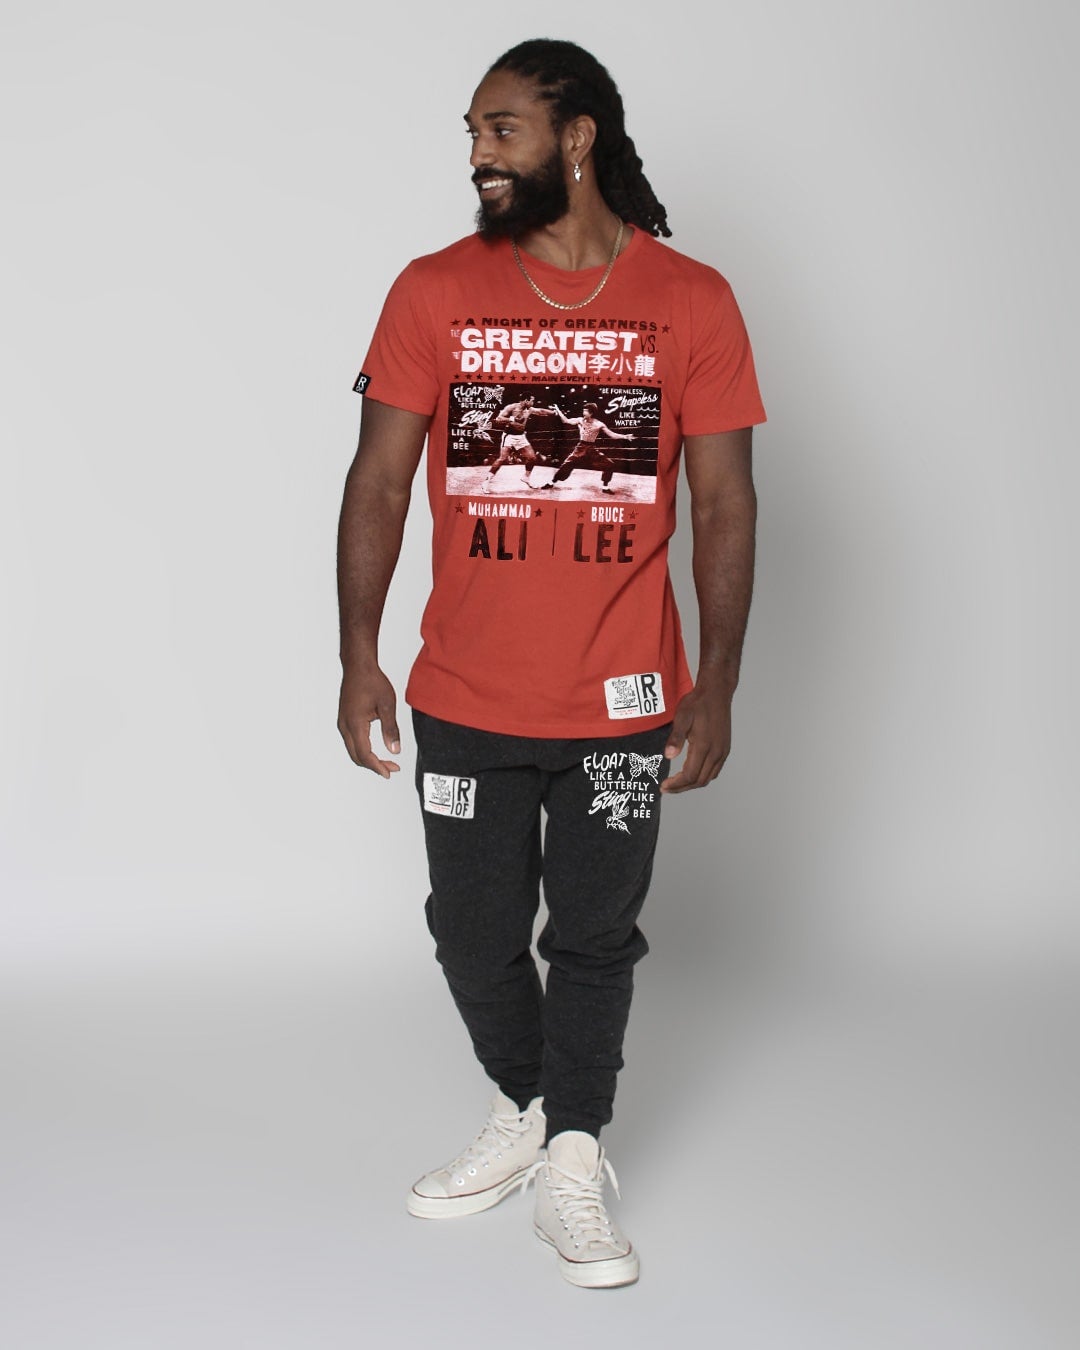 Ali vs Lee - Night of Greatness Red Tee - Roots of Fight